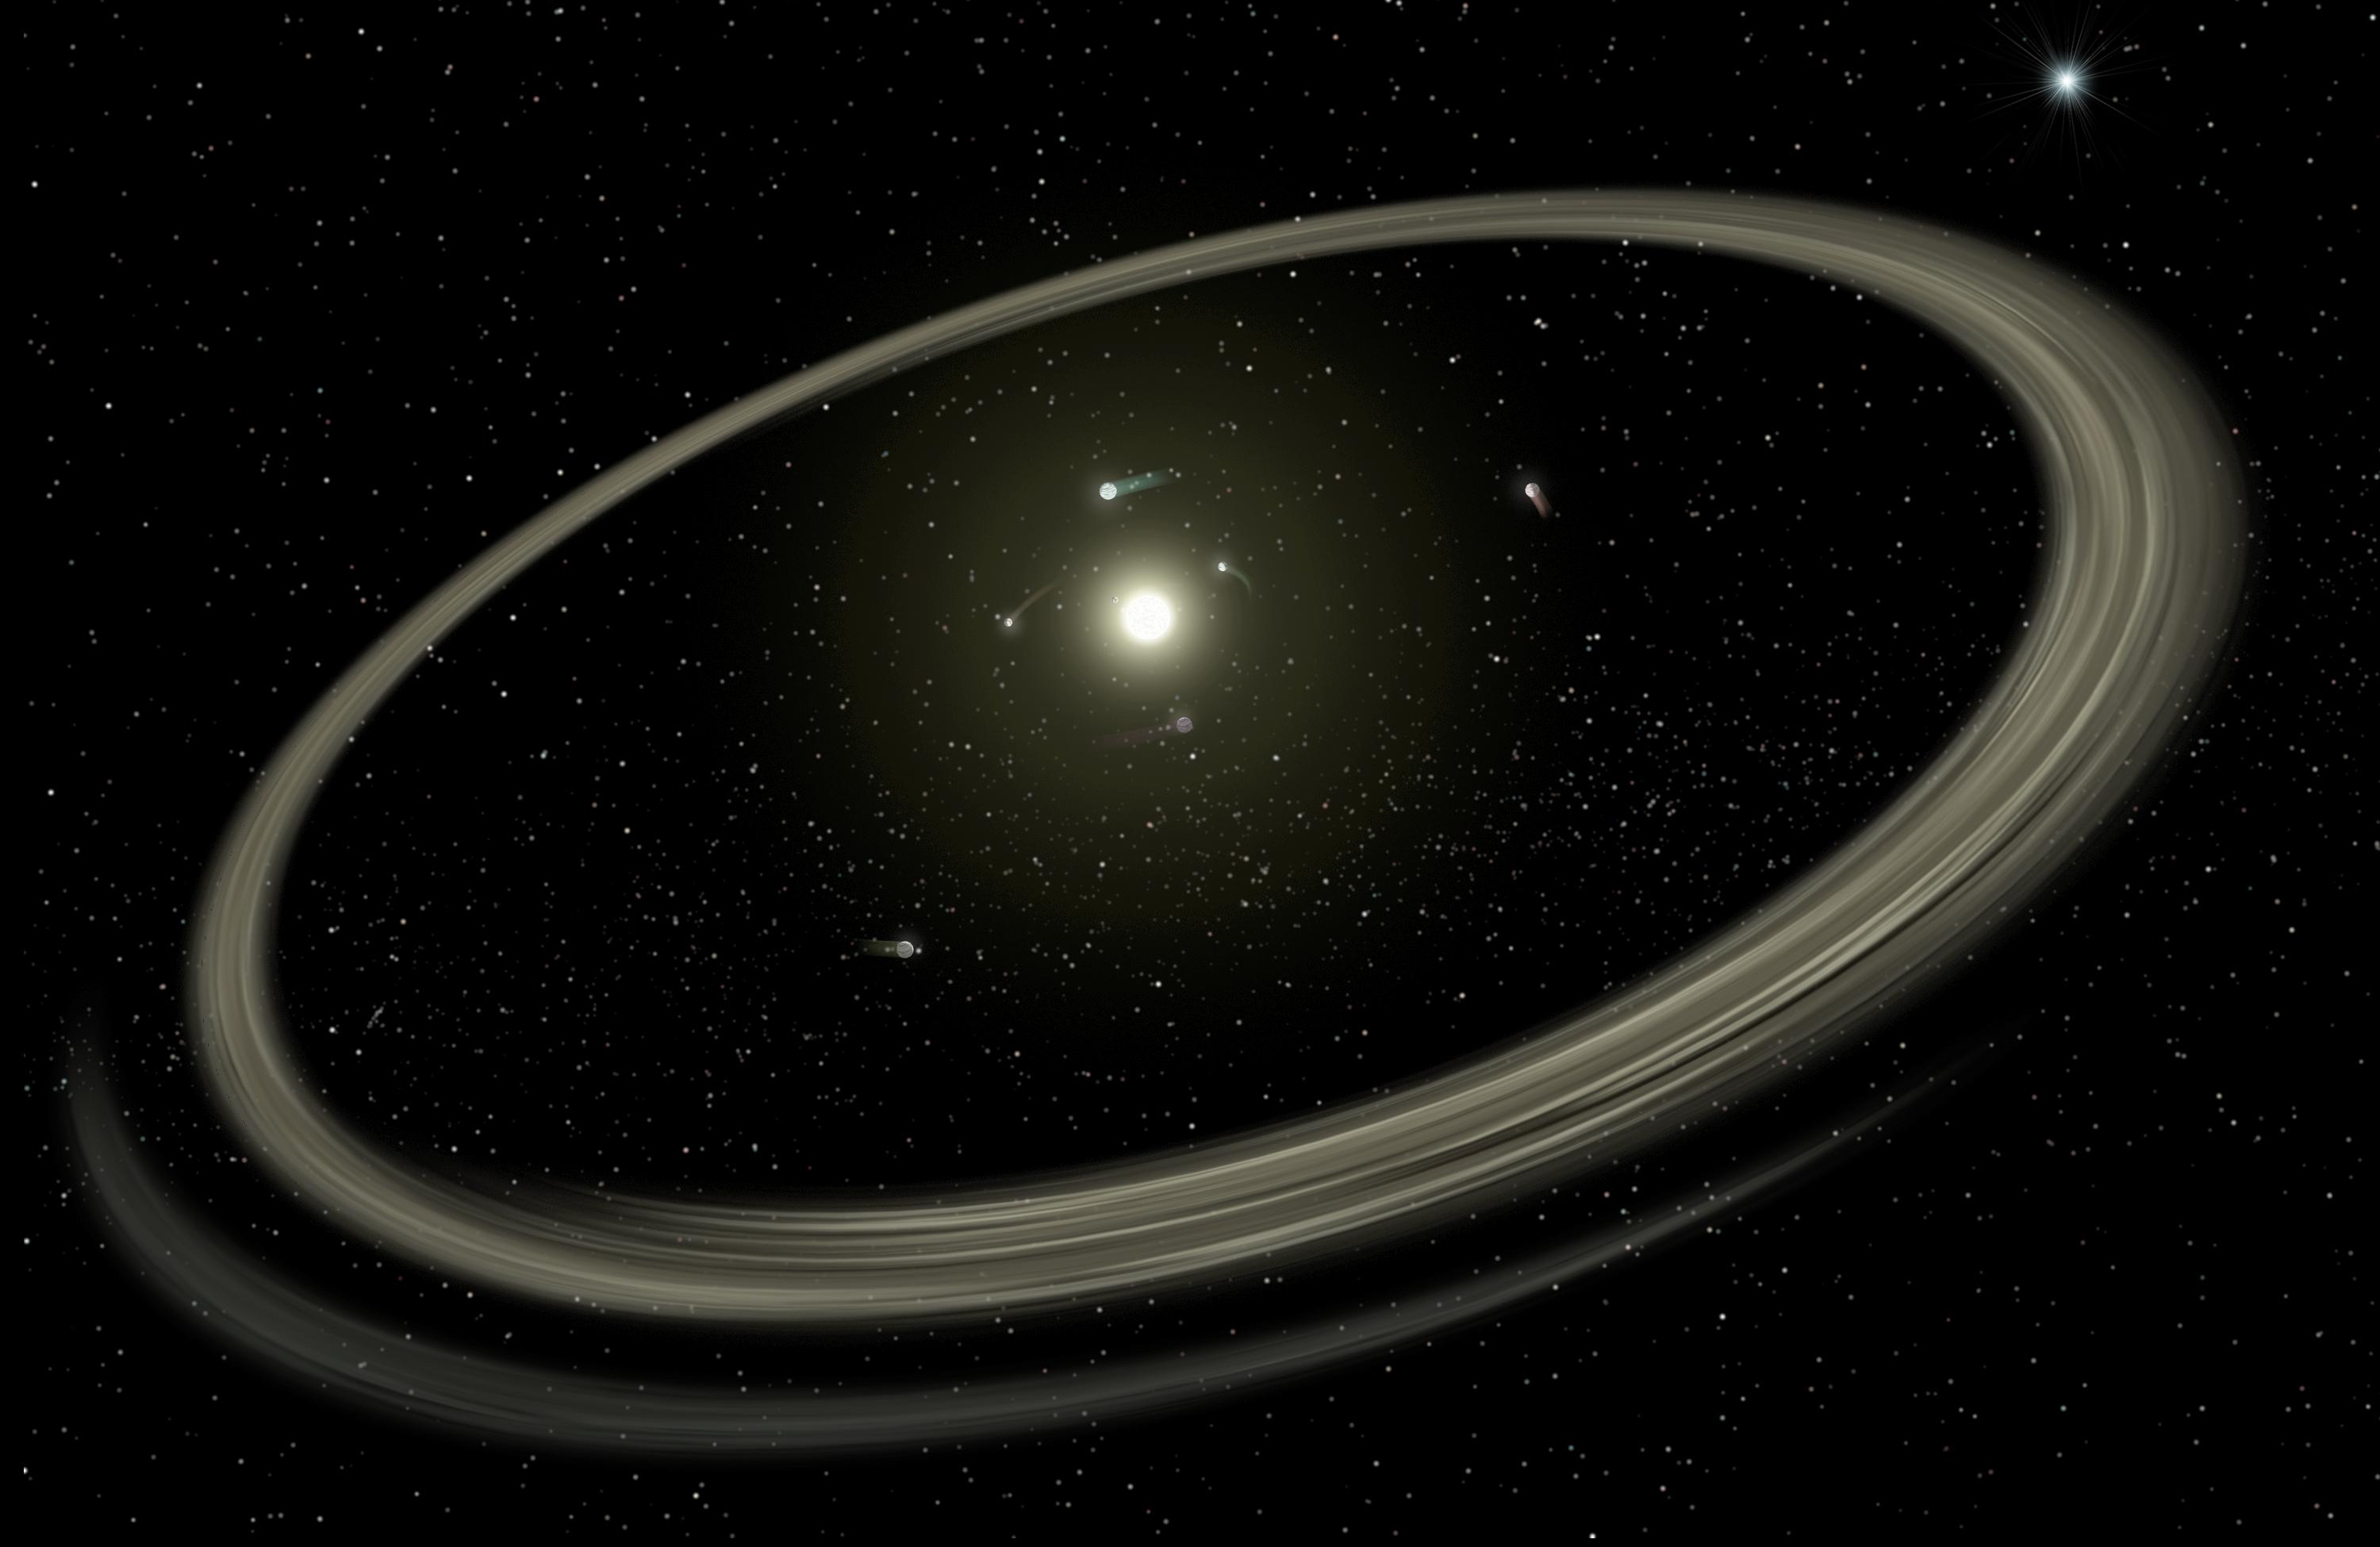 A small star at the center of a large ring in space